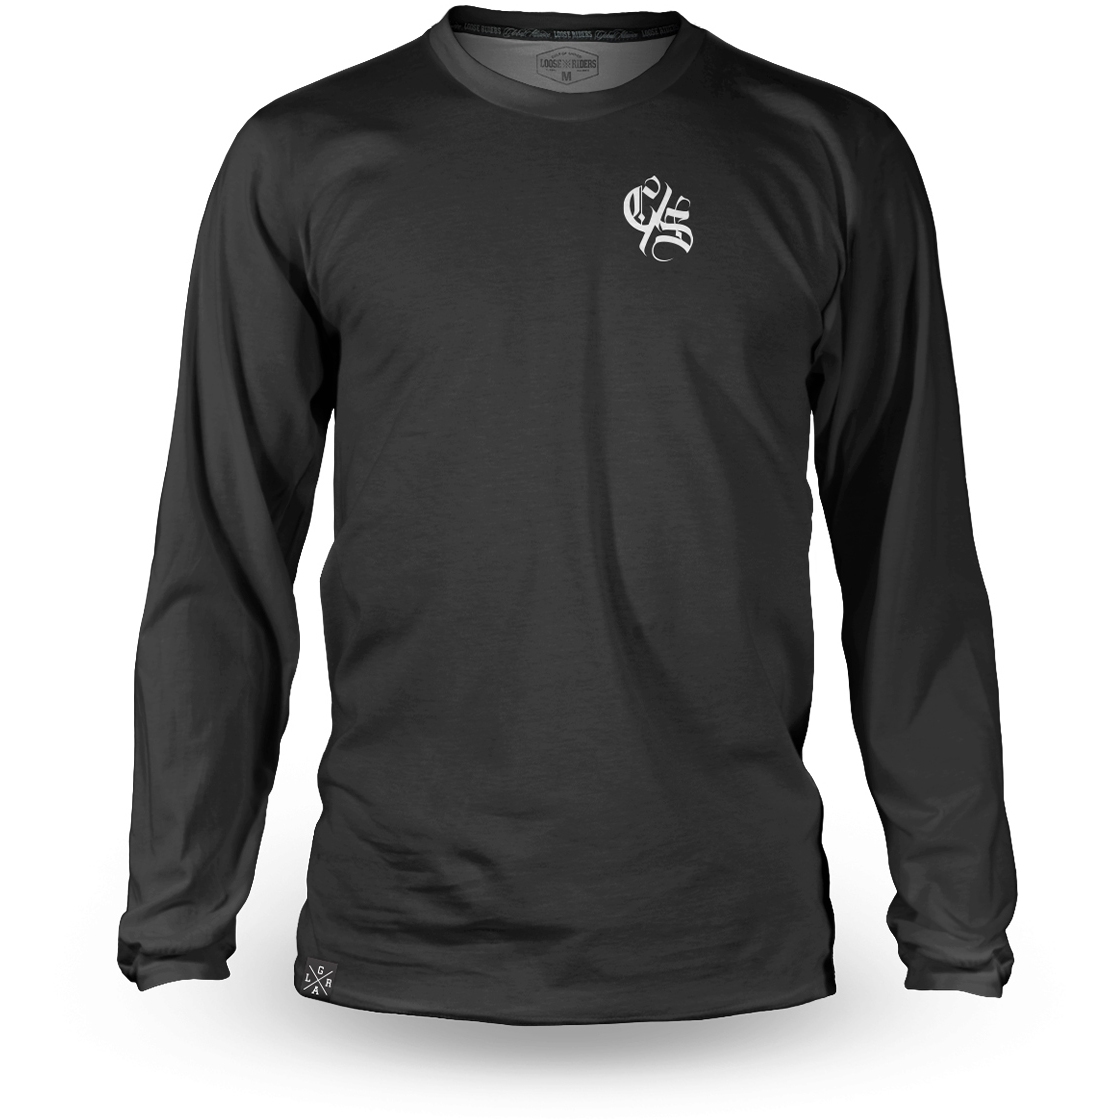 Picture of Loose Riders Technical Long Sleeve Jersey - The Cult of Shred